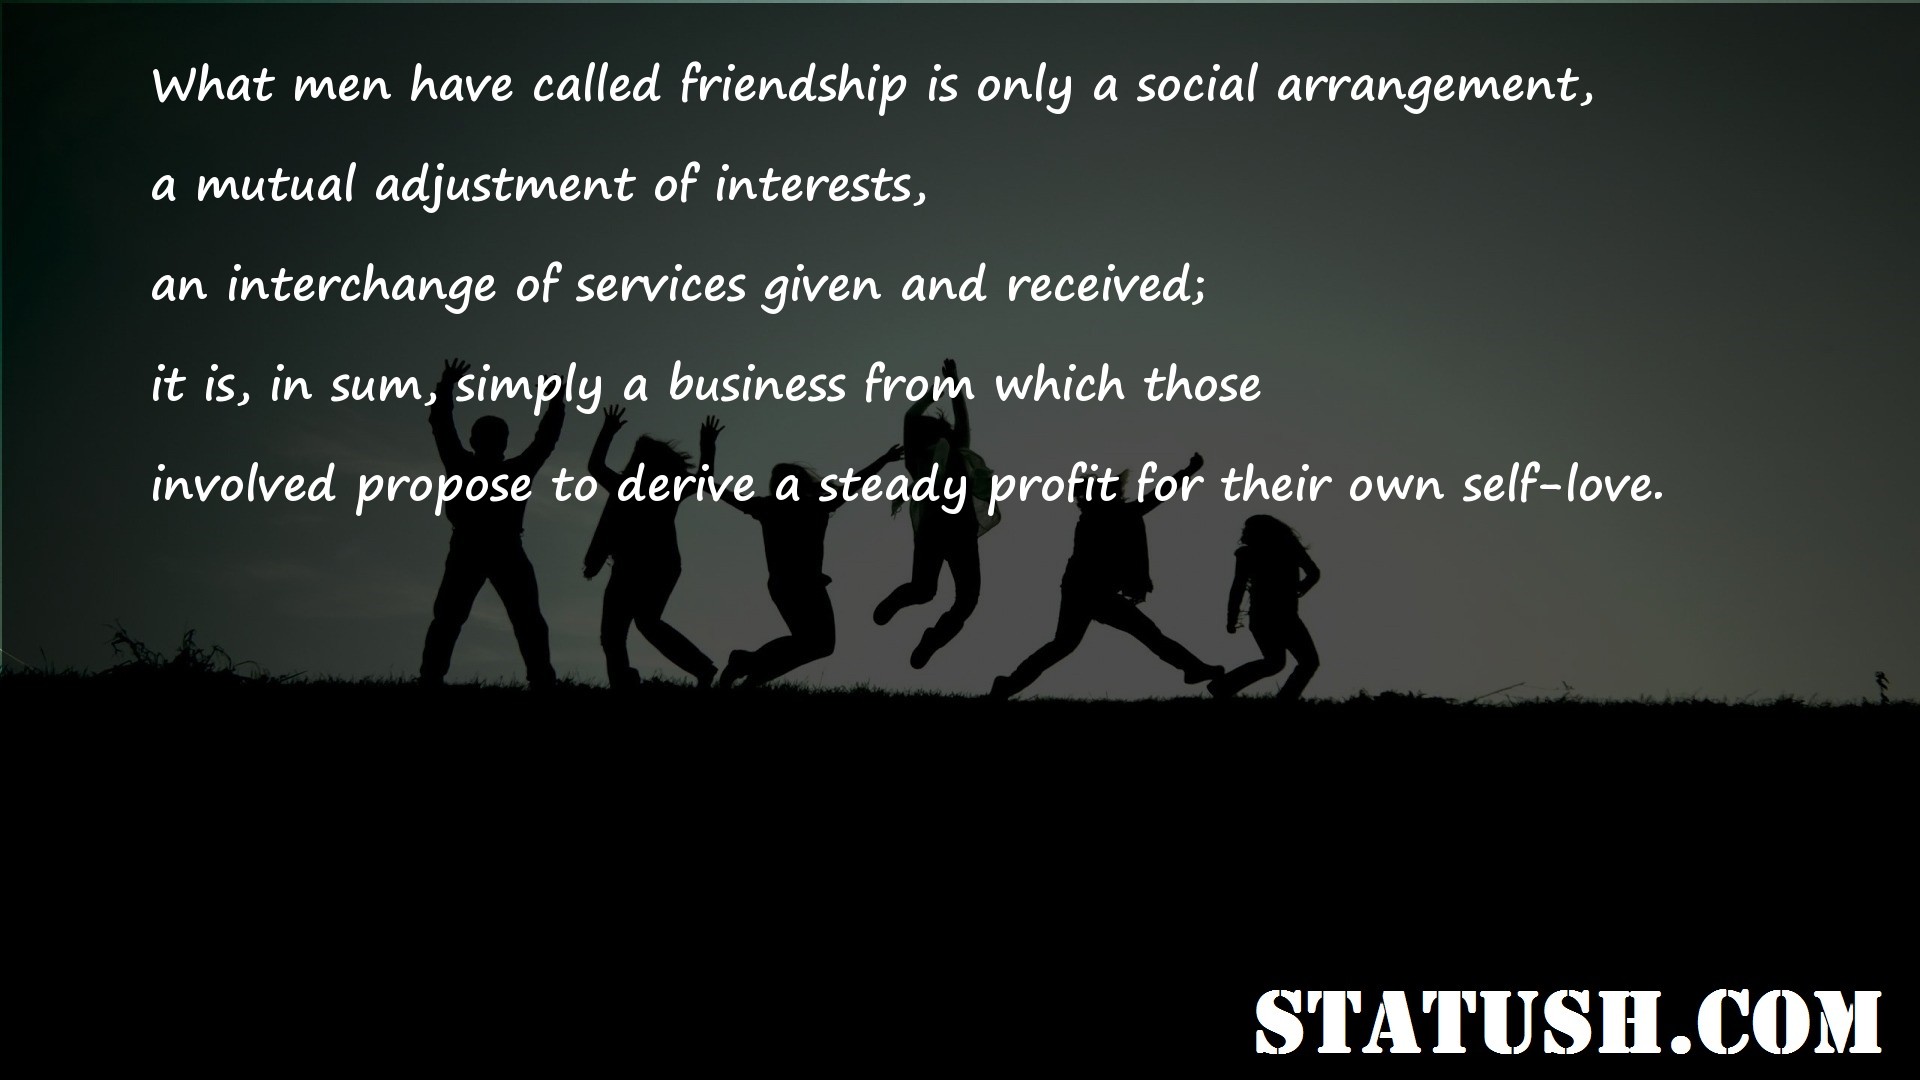 What men have called friendship is only a social arrangement - Friendship Quotes at statush.com